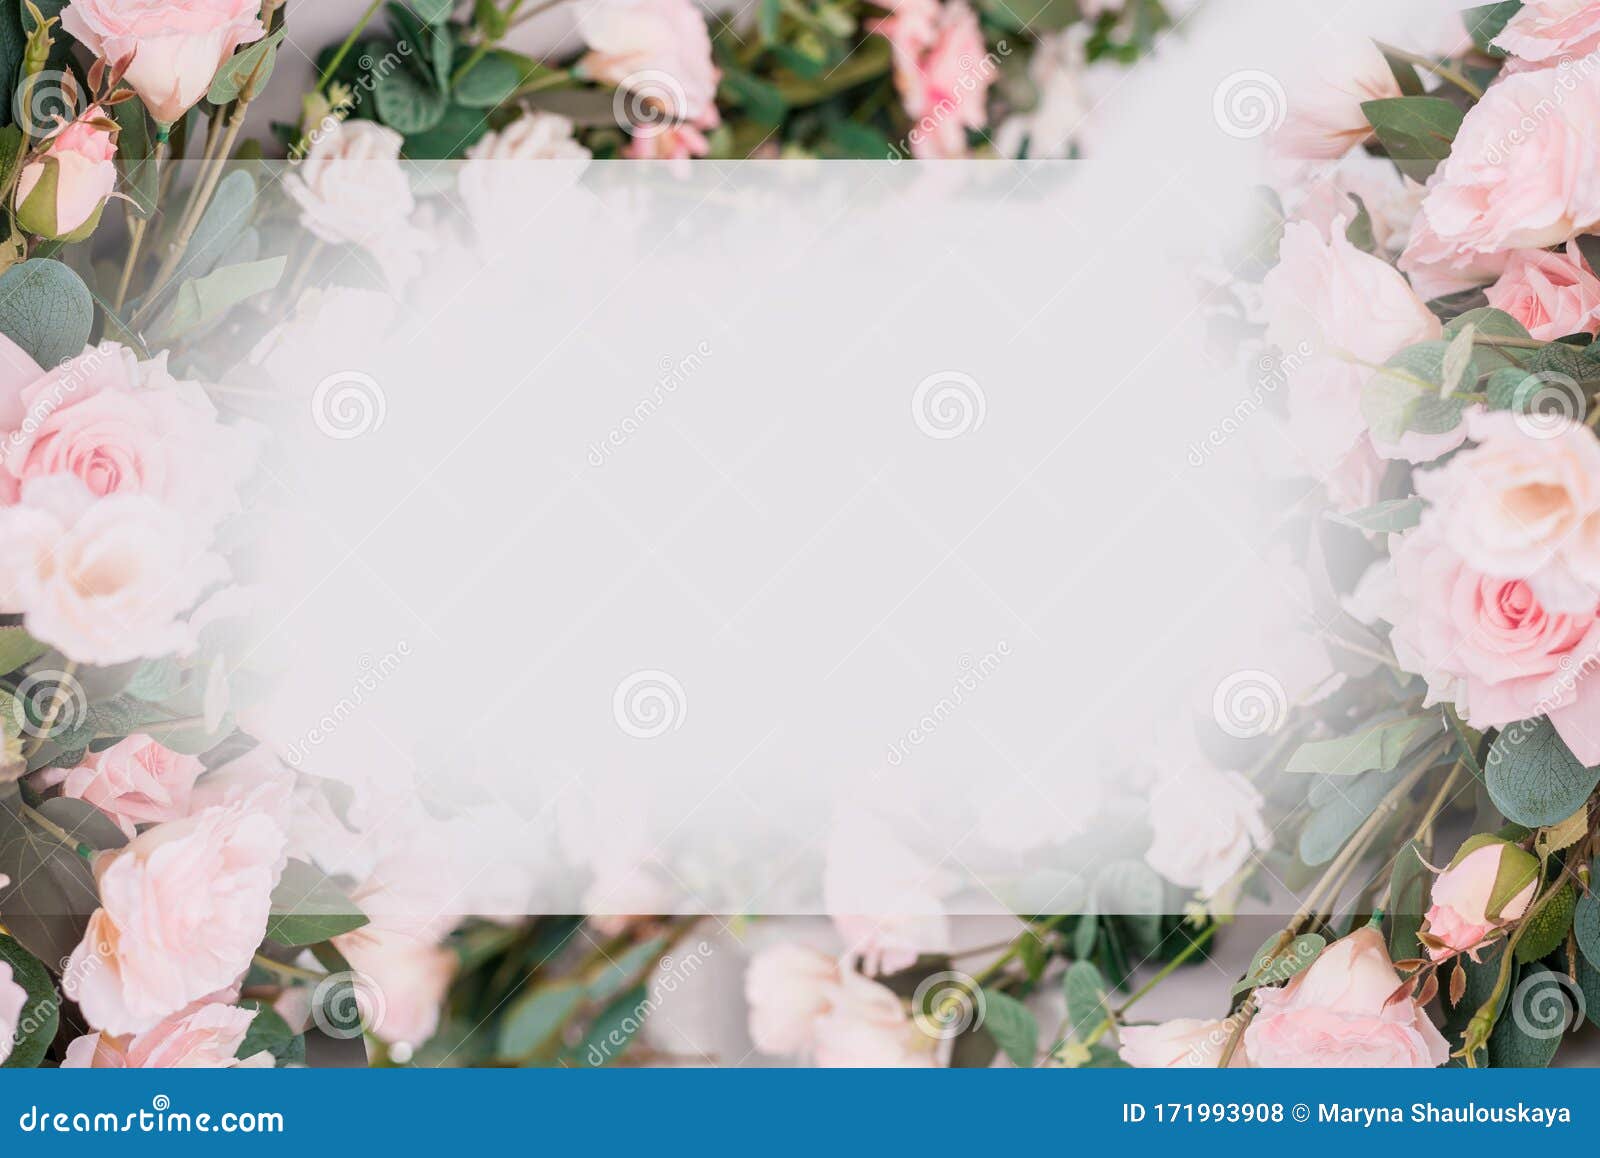 Beautiful Rose Flowers on a Light Background. Floral Frame in Soft Colors  with White Space for Text Stock Photo - Image of festive, fresh: 171993908